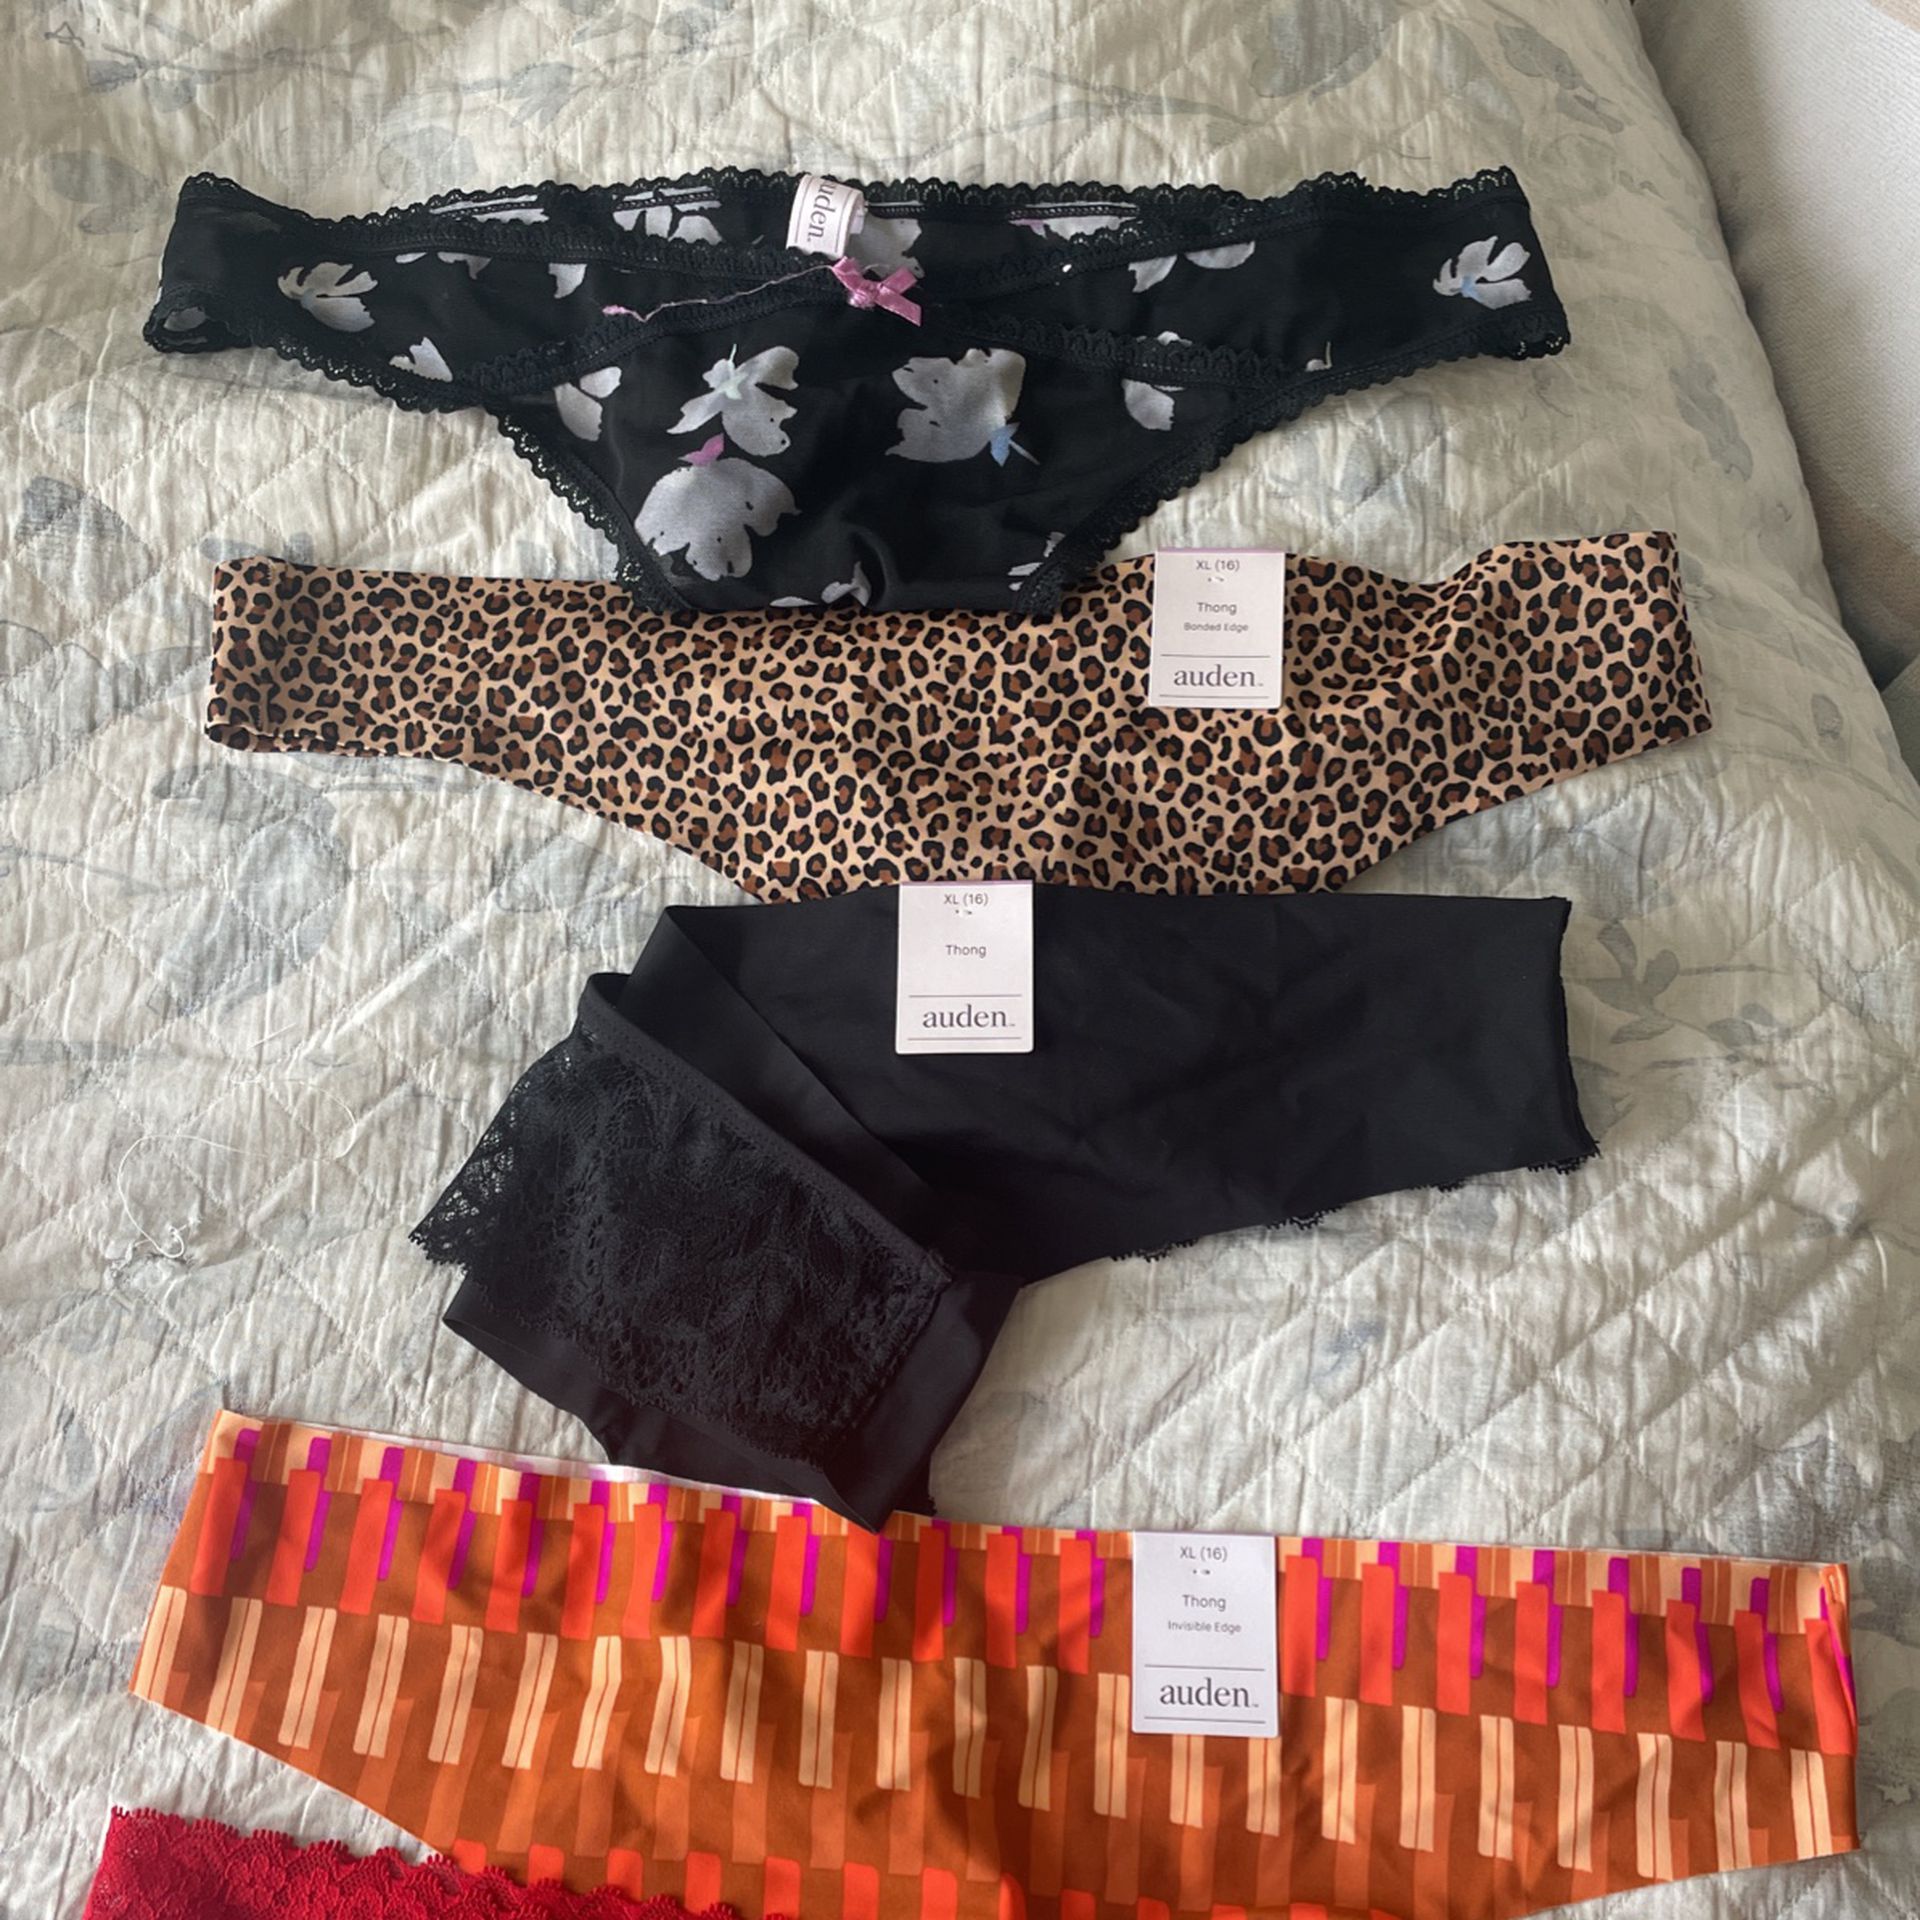 New With Tags Thong Underwear Auden By Target, $20 Total Lot for